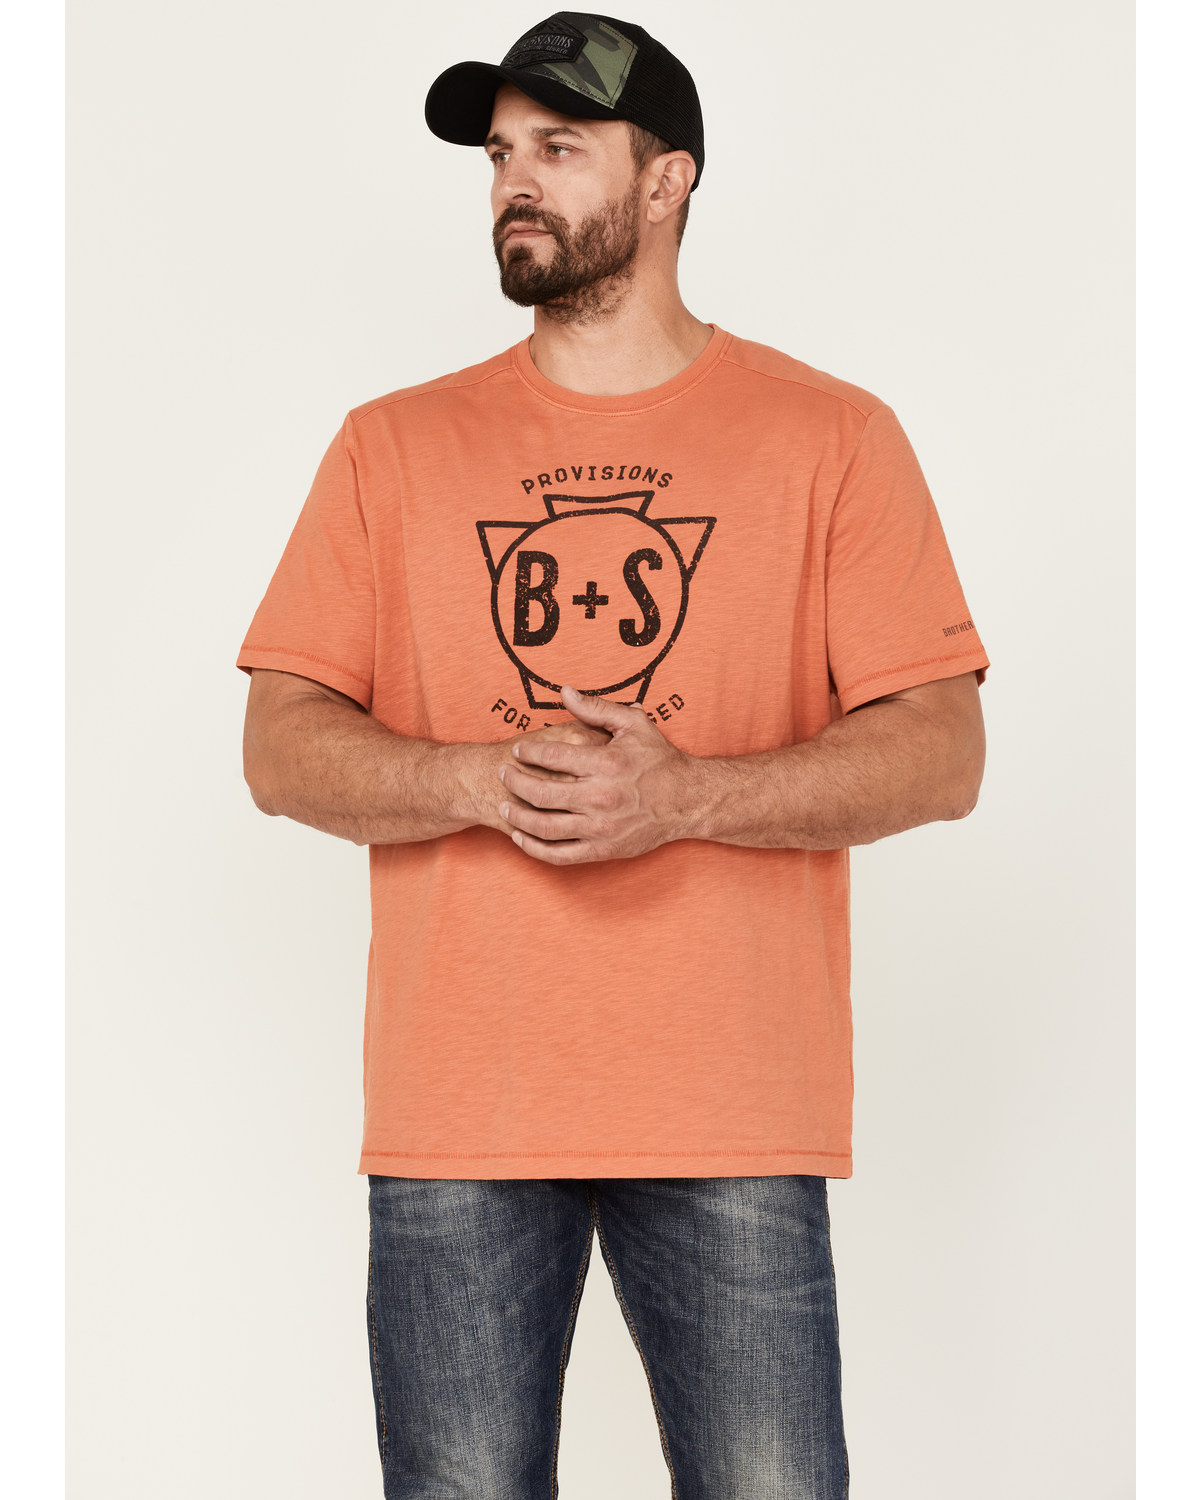 Brothers and Sons Men's Logo Graphic Short Sleeve T-Shirt